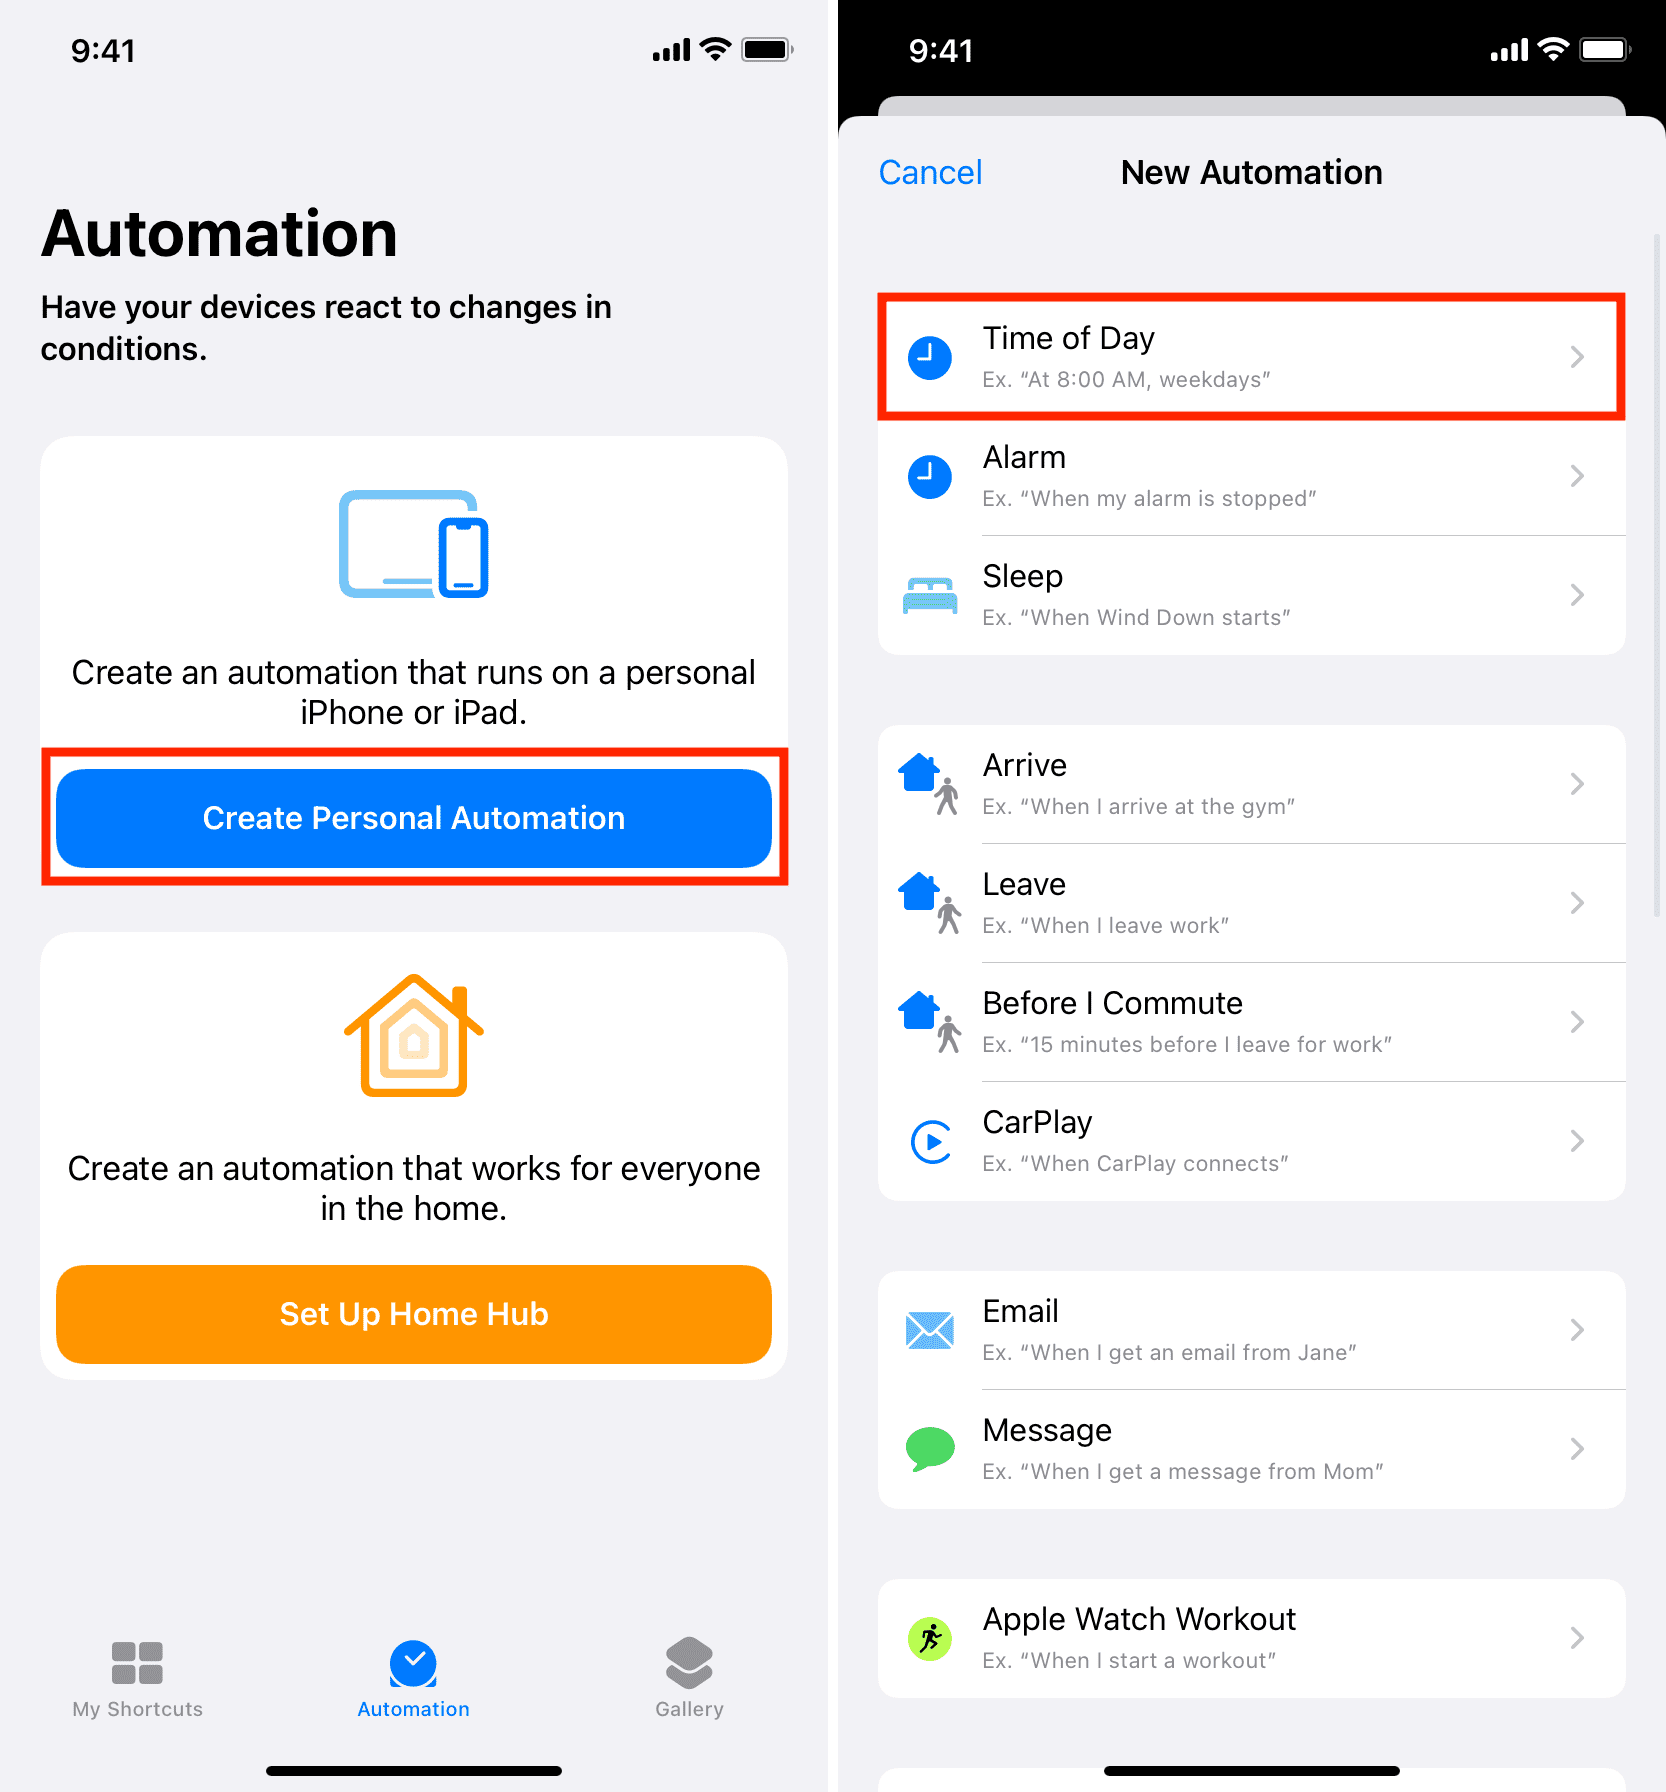 Create Personal Automation to pause music on iPhone